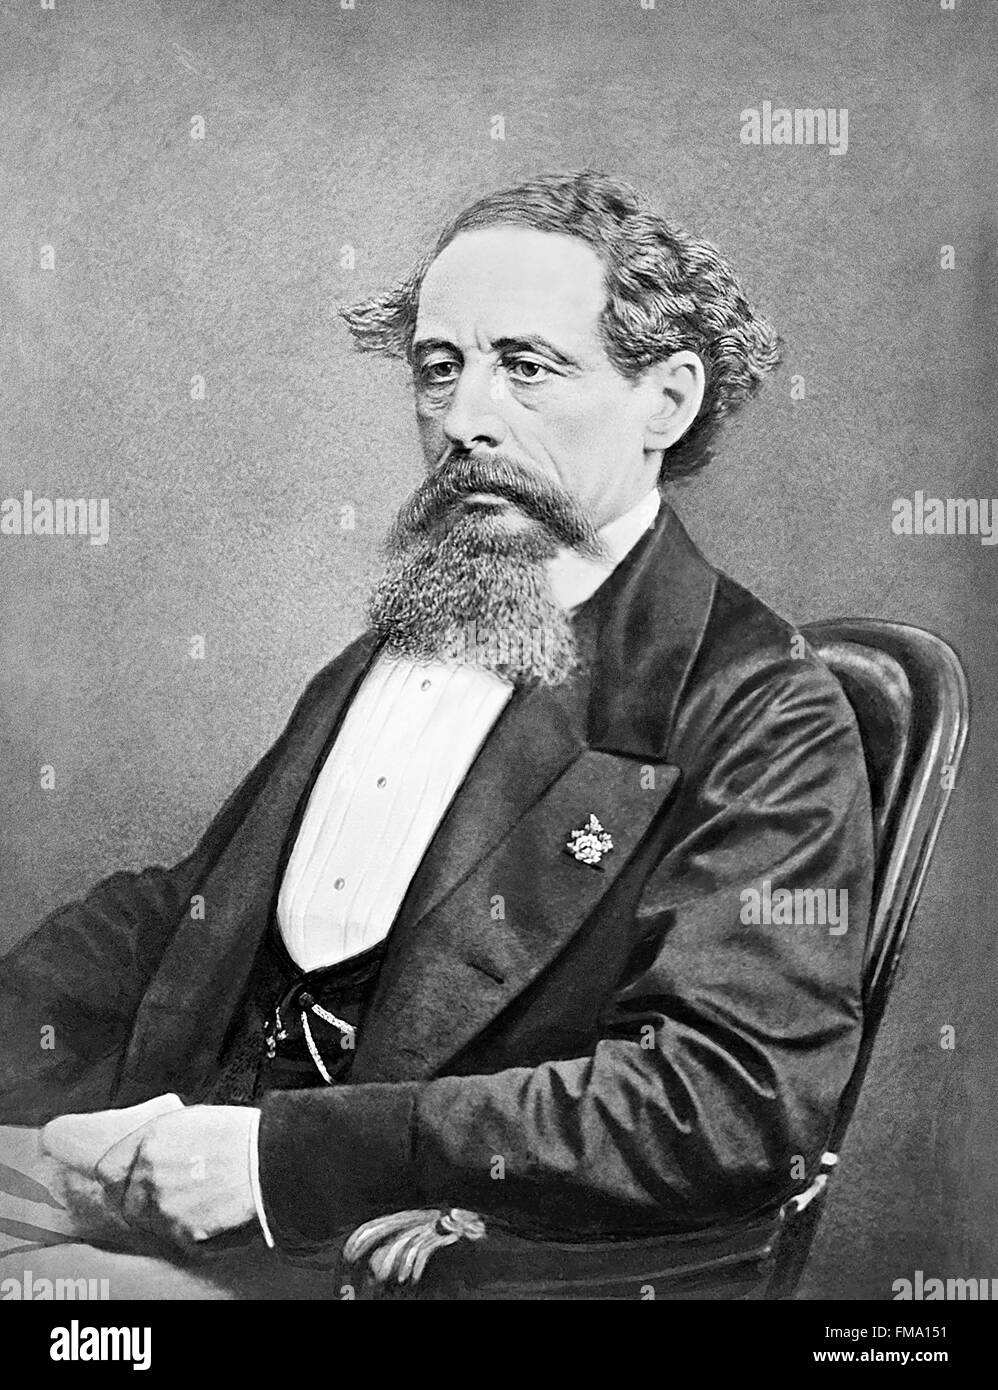 A biography of charles dickens the nineteenth century english writer